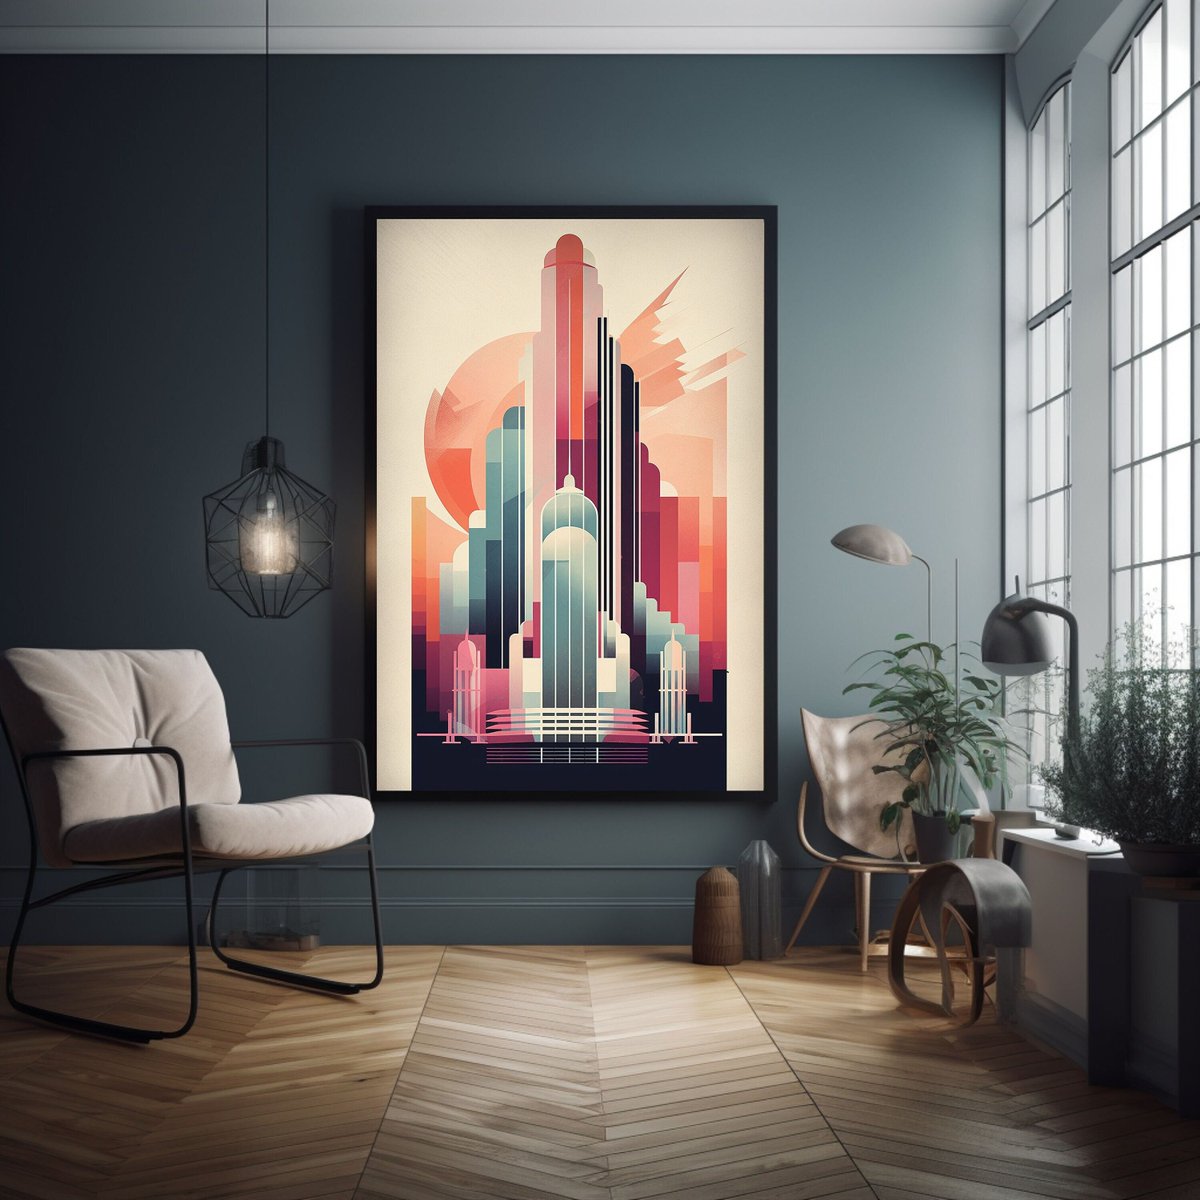 Excited to share the latest addition to my #etsy shop: Vibrant Art Deco Canvas - Step-Back Skyscraper with Contrasting Colours, Classic Design, Stylish Wall Hanging etsy.me/3XbqVuP #modernwallart #uniquehomedecor #contemporarydesign #vintagestyle #homegift #art